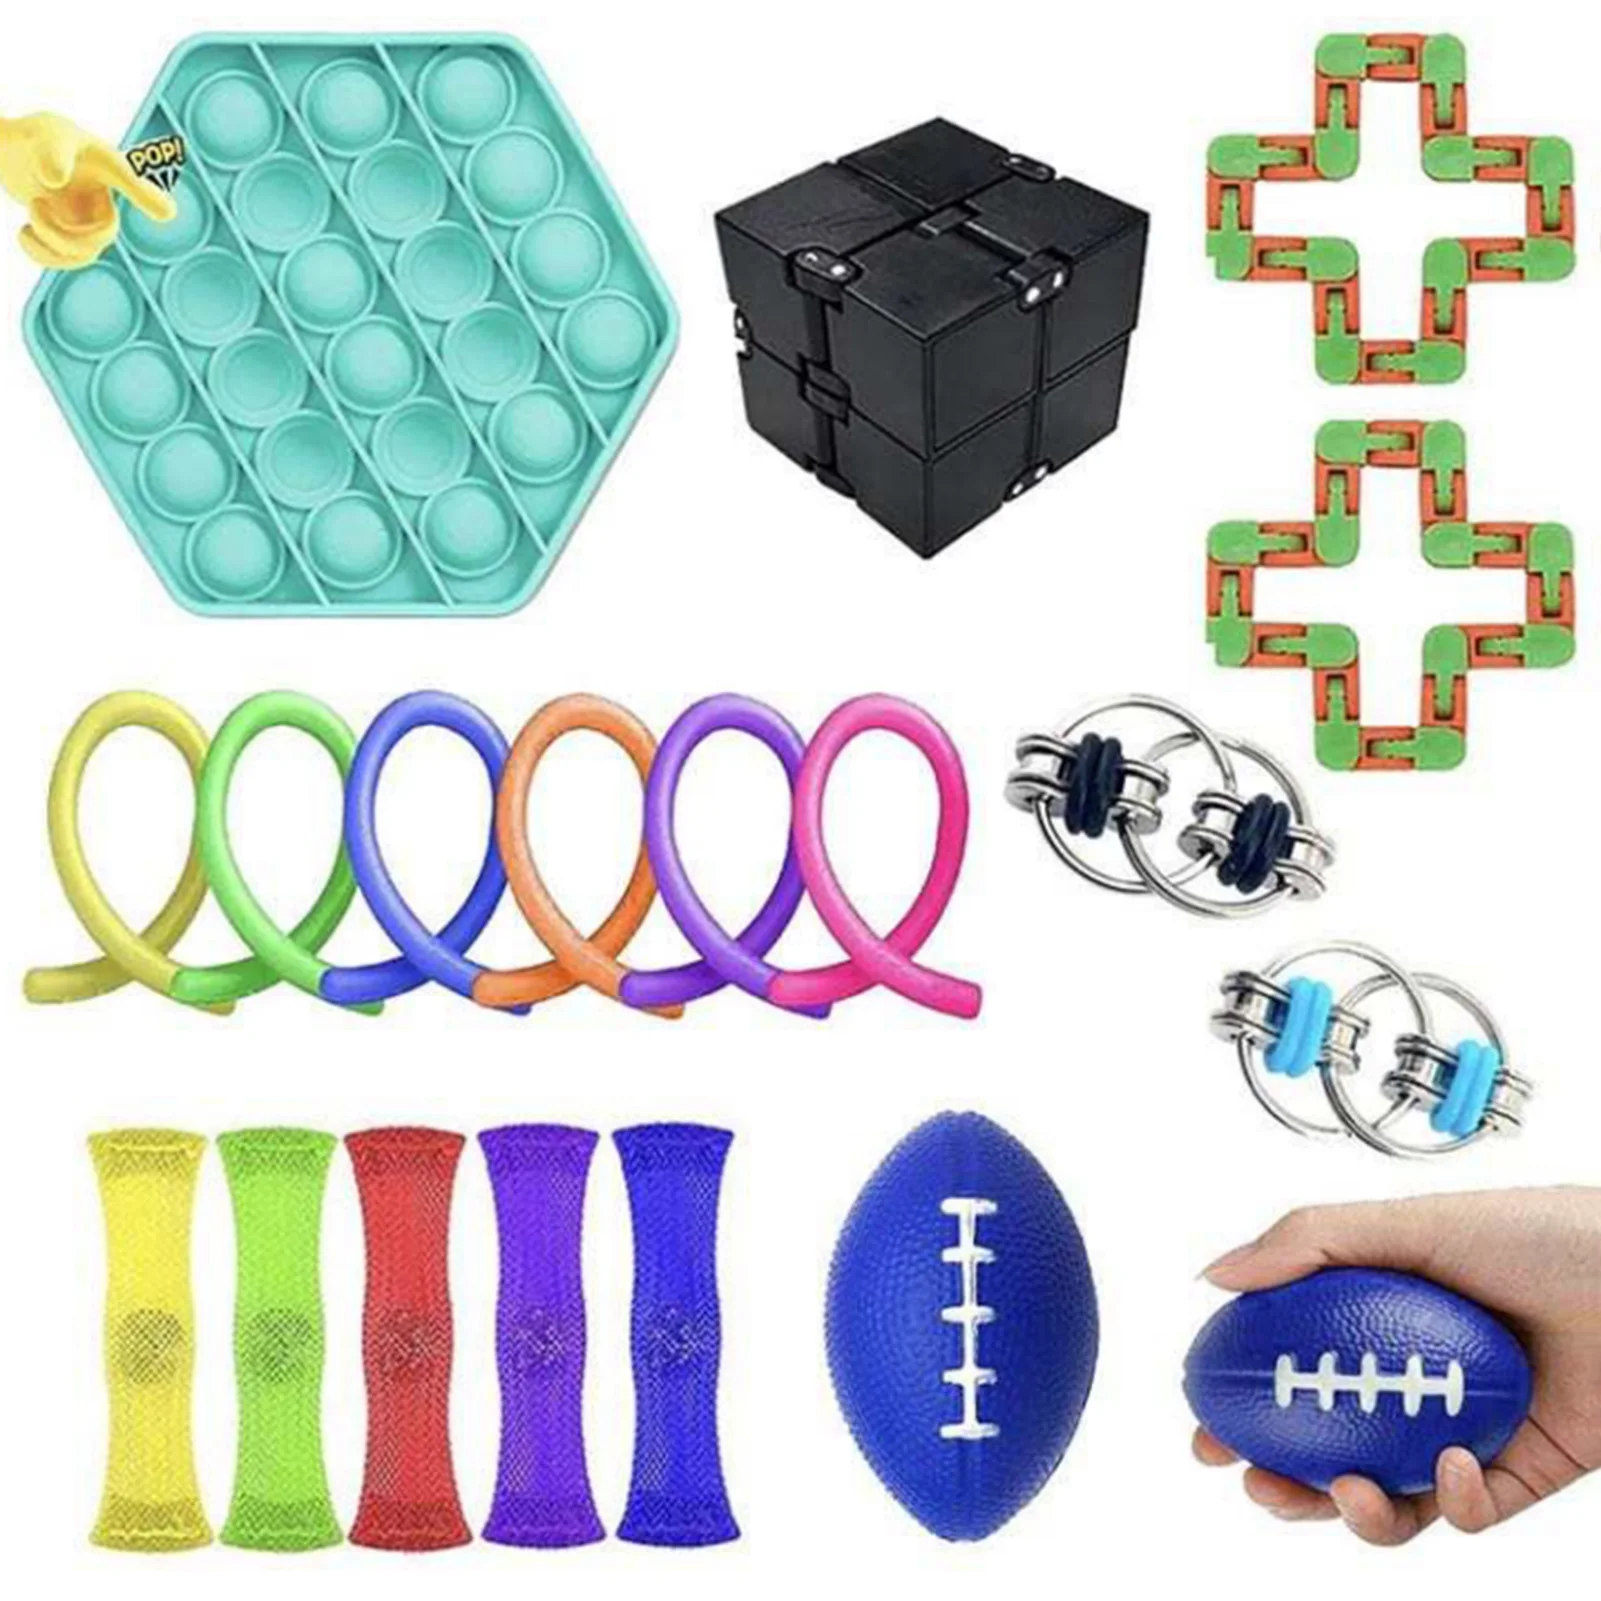 19PCS Sensory Fidget Toys Set Anti Stress Stretchy Strings Gift Pack Adults Kids Squishy Sensory Stress Relief Figet Toys enlarge